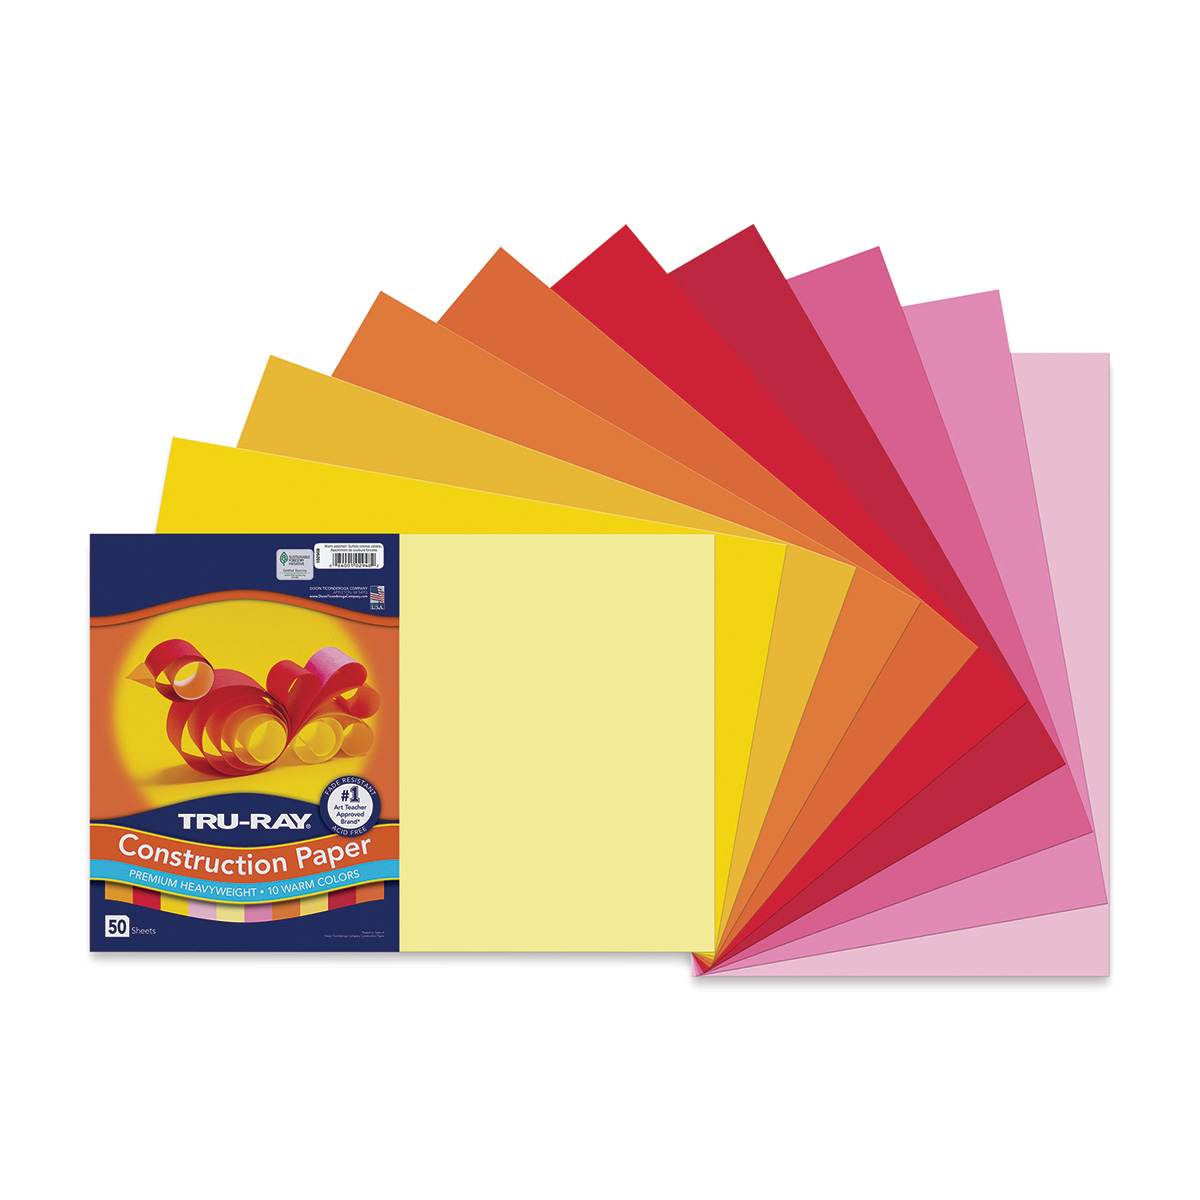 Pacon Tru-Ray Construction Paper, Brown, 12 x 18, 50 Sheets